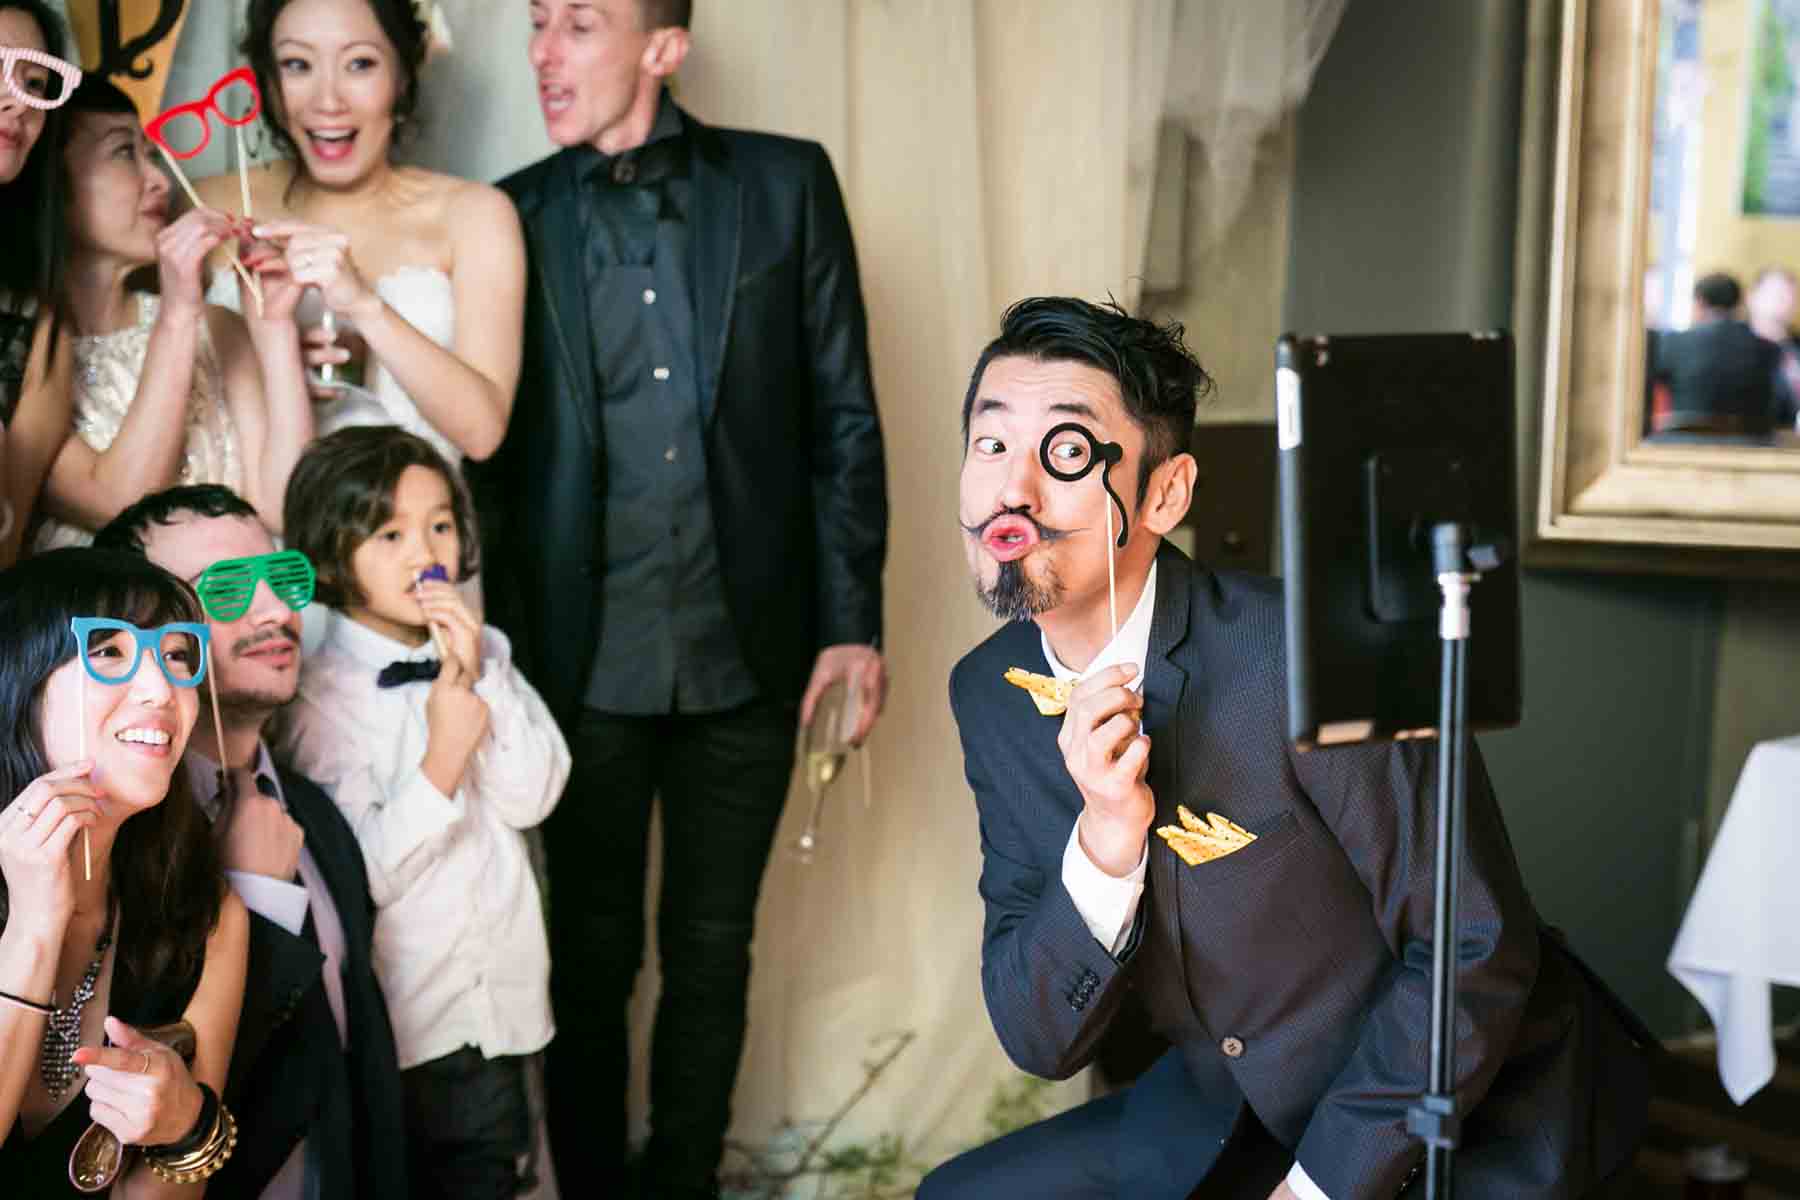 Man playing with guests in front of photo booth camera for an article on the best wedding jobs for family and friends